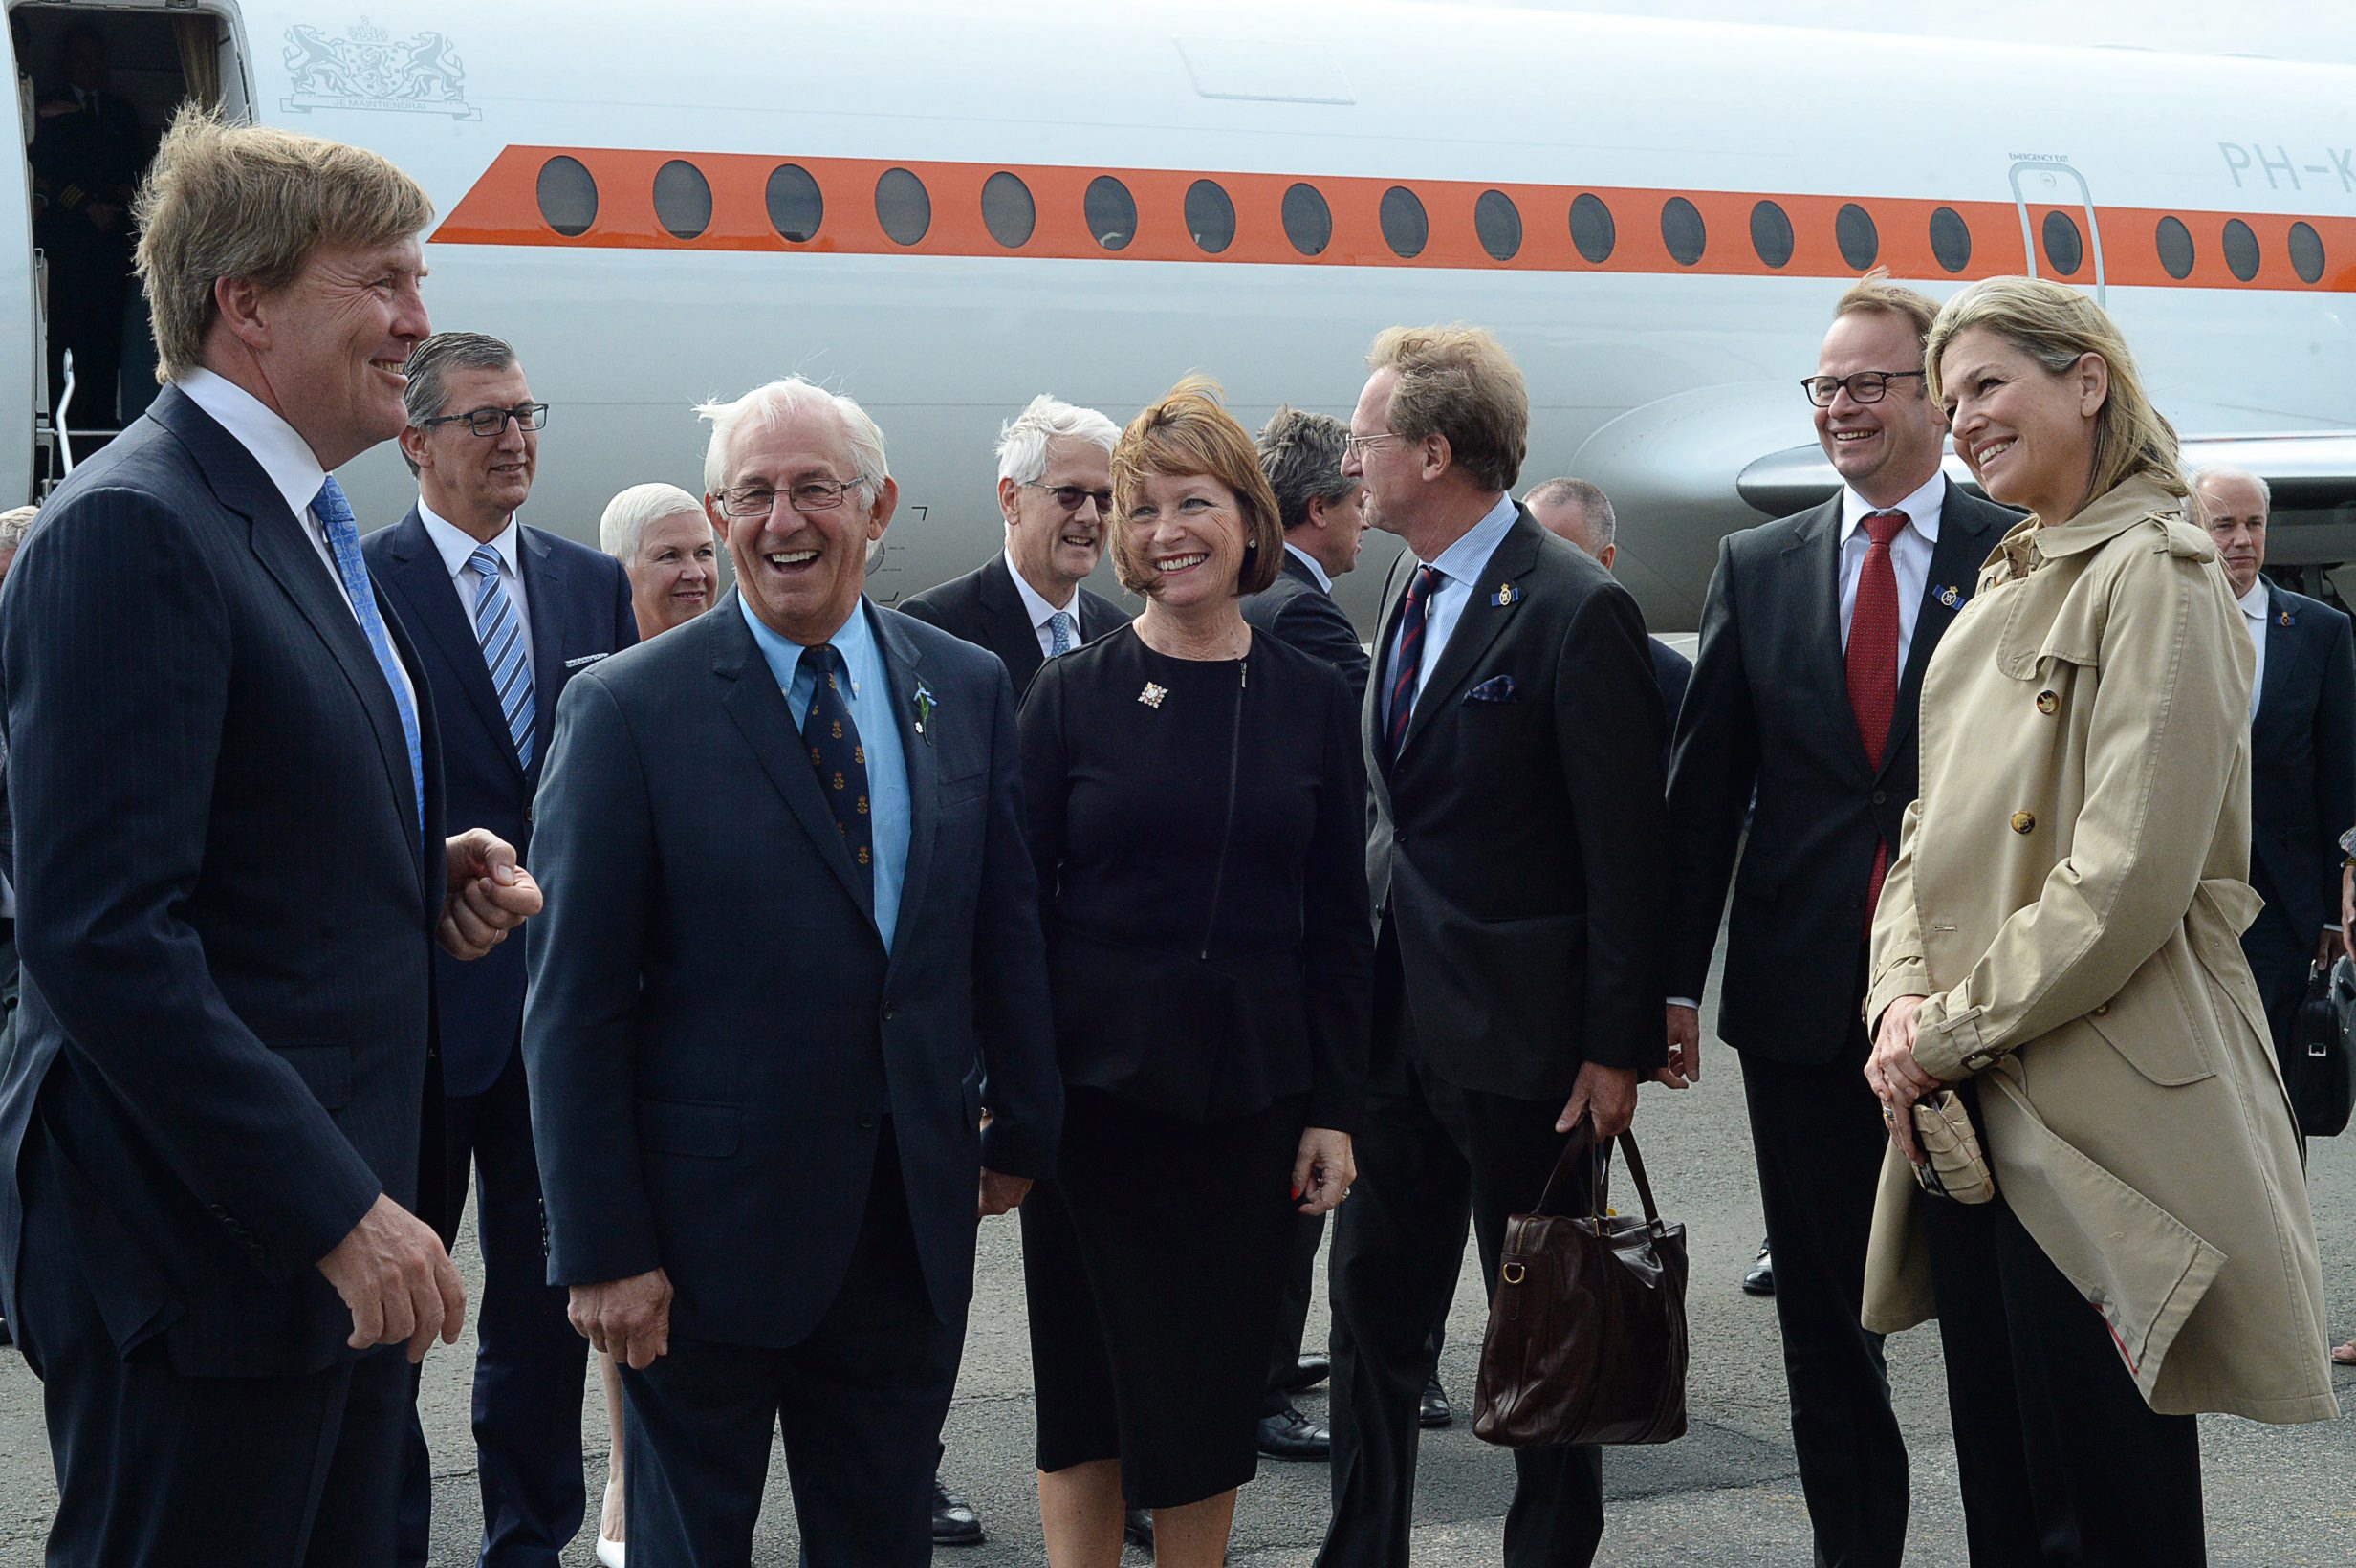 King Willem-Alexander, left, and Queen Maxima, right, of the Netherlands, are greeted by Newfoundland and Labrador Lieut-Gov. Frank Fagan, second from left, and his wife Patricia as they arrive at St. John's International Airport, Tuesday, May 26, 2015, in St John's, Newfoundland. (Joe Gibons/St. John's Telegram via The Canadian Press via AP, Pool)